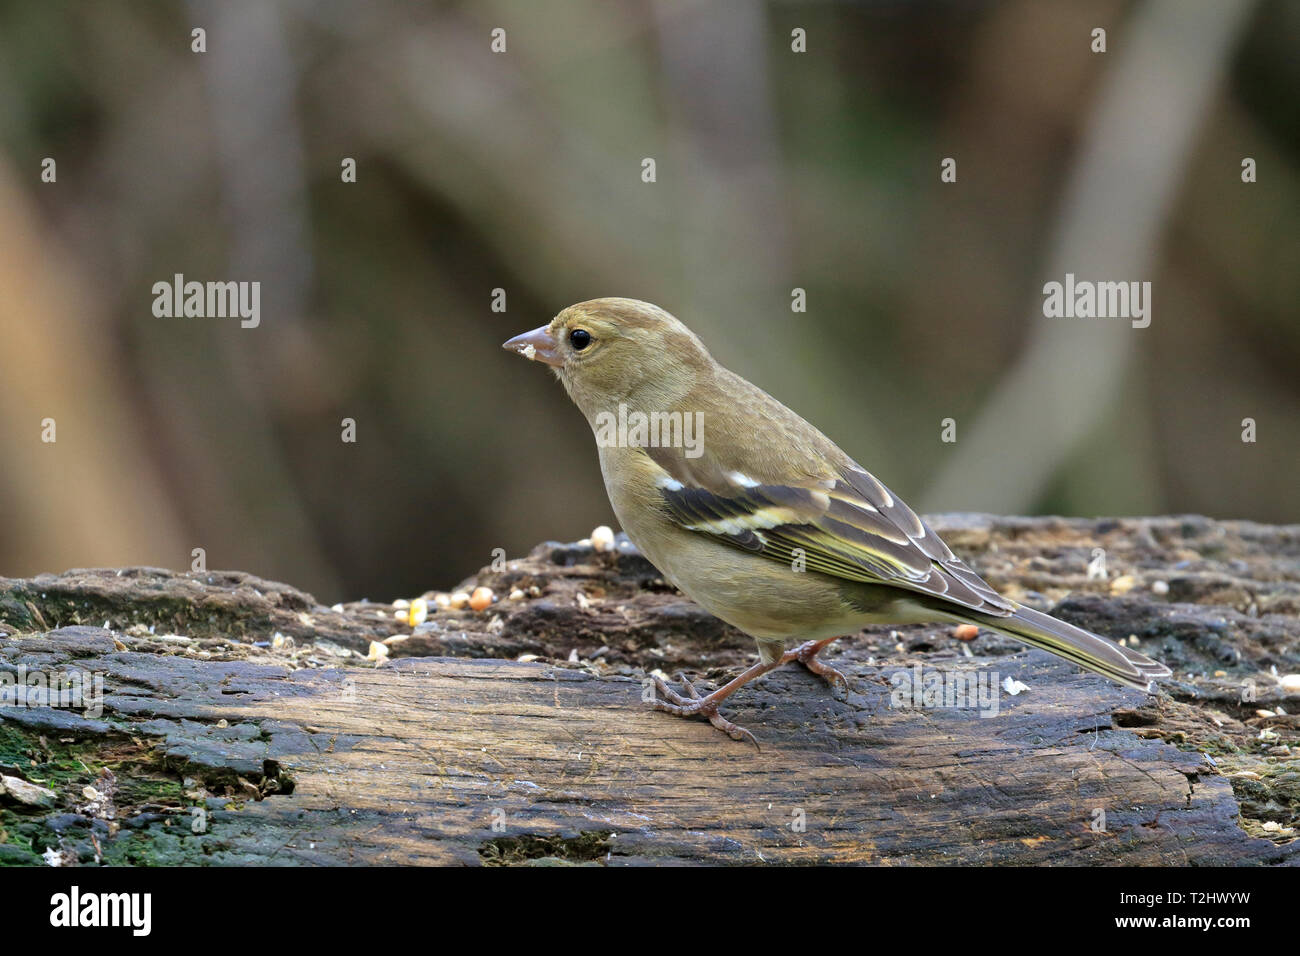 Adult female Chaffinch, Fringilla coelebs eating seed on decaying tree branch, Stock Photo